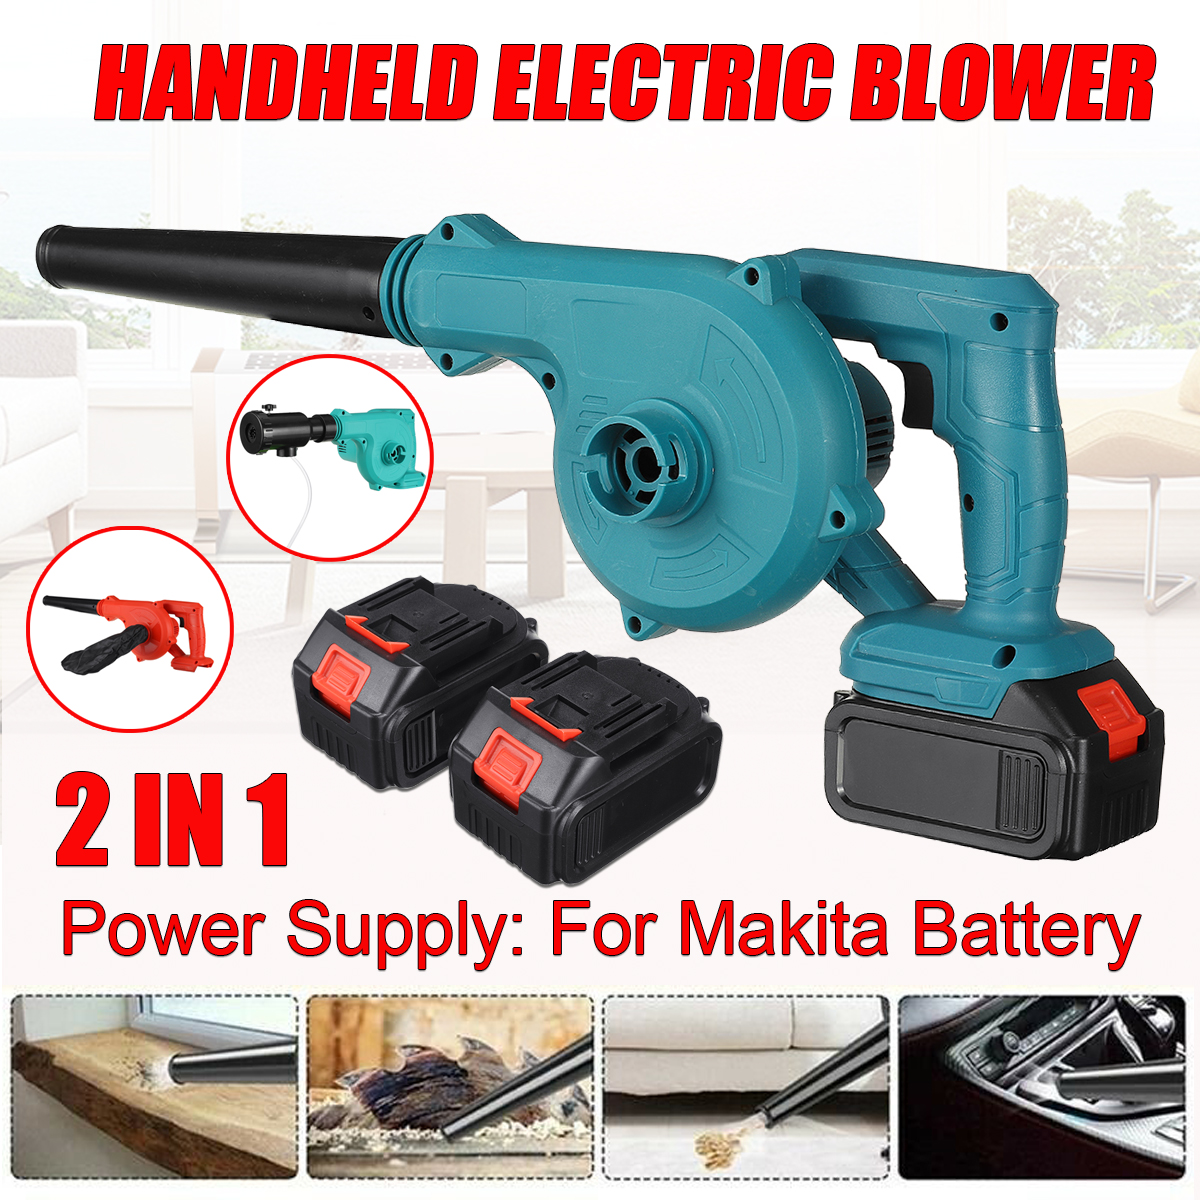 1800W-Portable-Cordless-Car-Washer-High-Pressure-Car-Household-Washer-Cleaner-Guns-Pumps-Tools-Fit-M-1912132-1